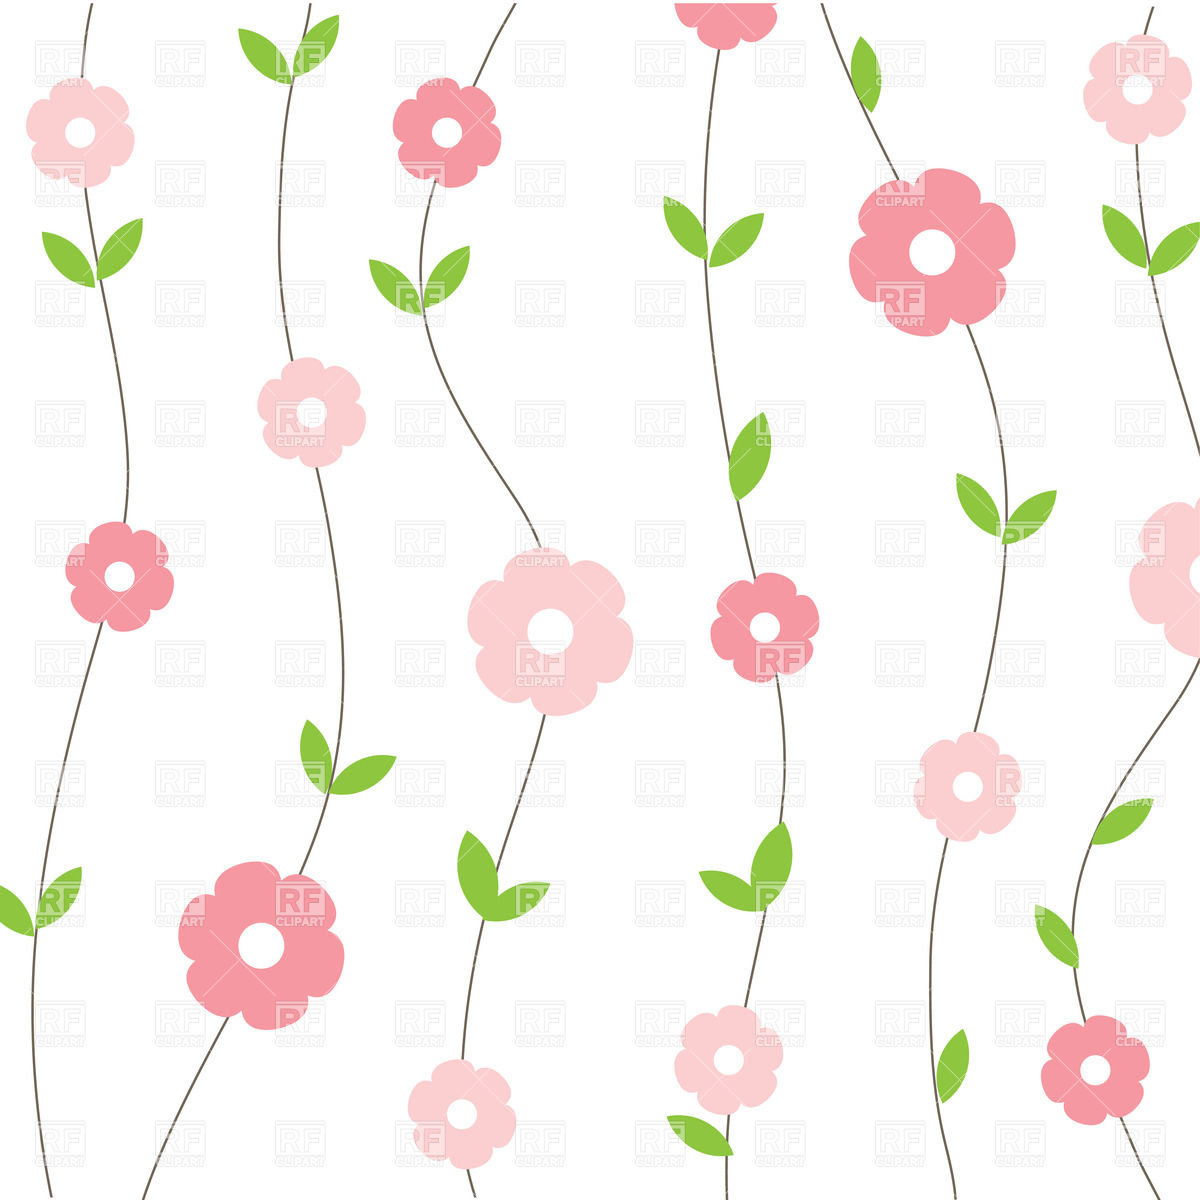 Cartoon Simple Flowers Download Royalty Free Vector Clipart  Eps